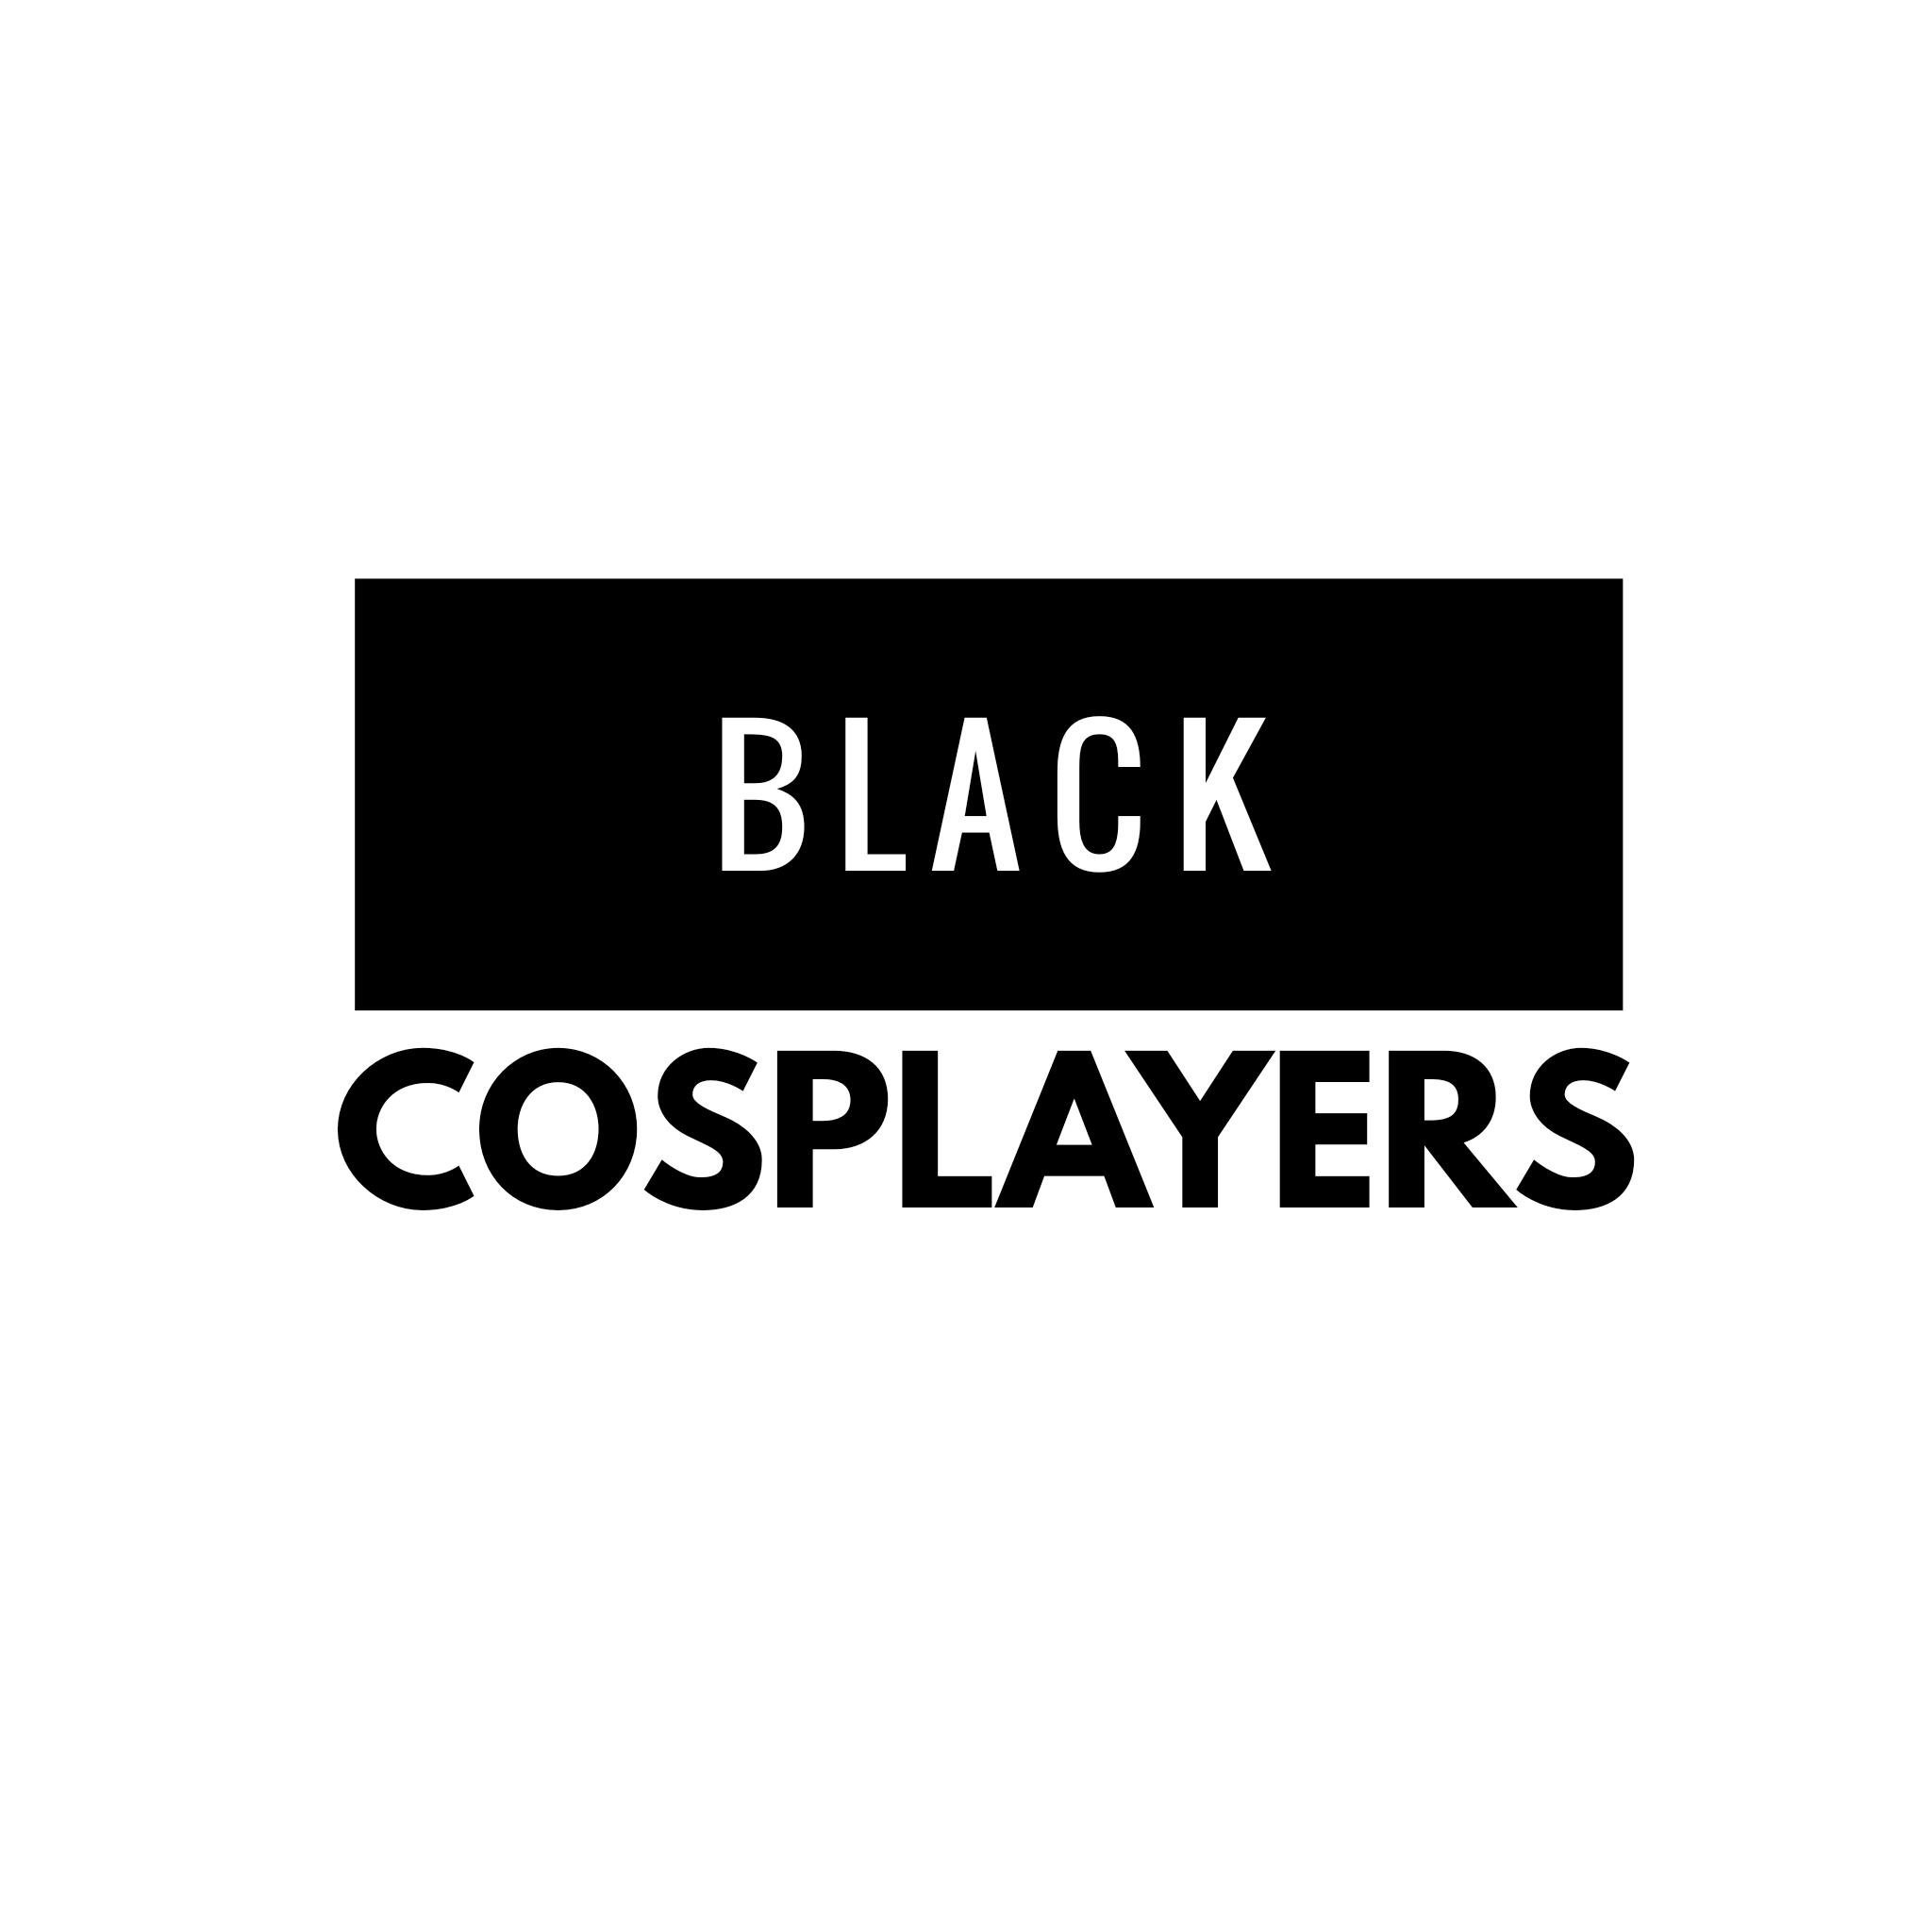 Celebrating Black Cosplayers Worldwide 🌎
Follow us on Instagram, tag us or and use #blackcosplayersofficial to be featured.